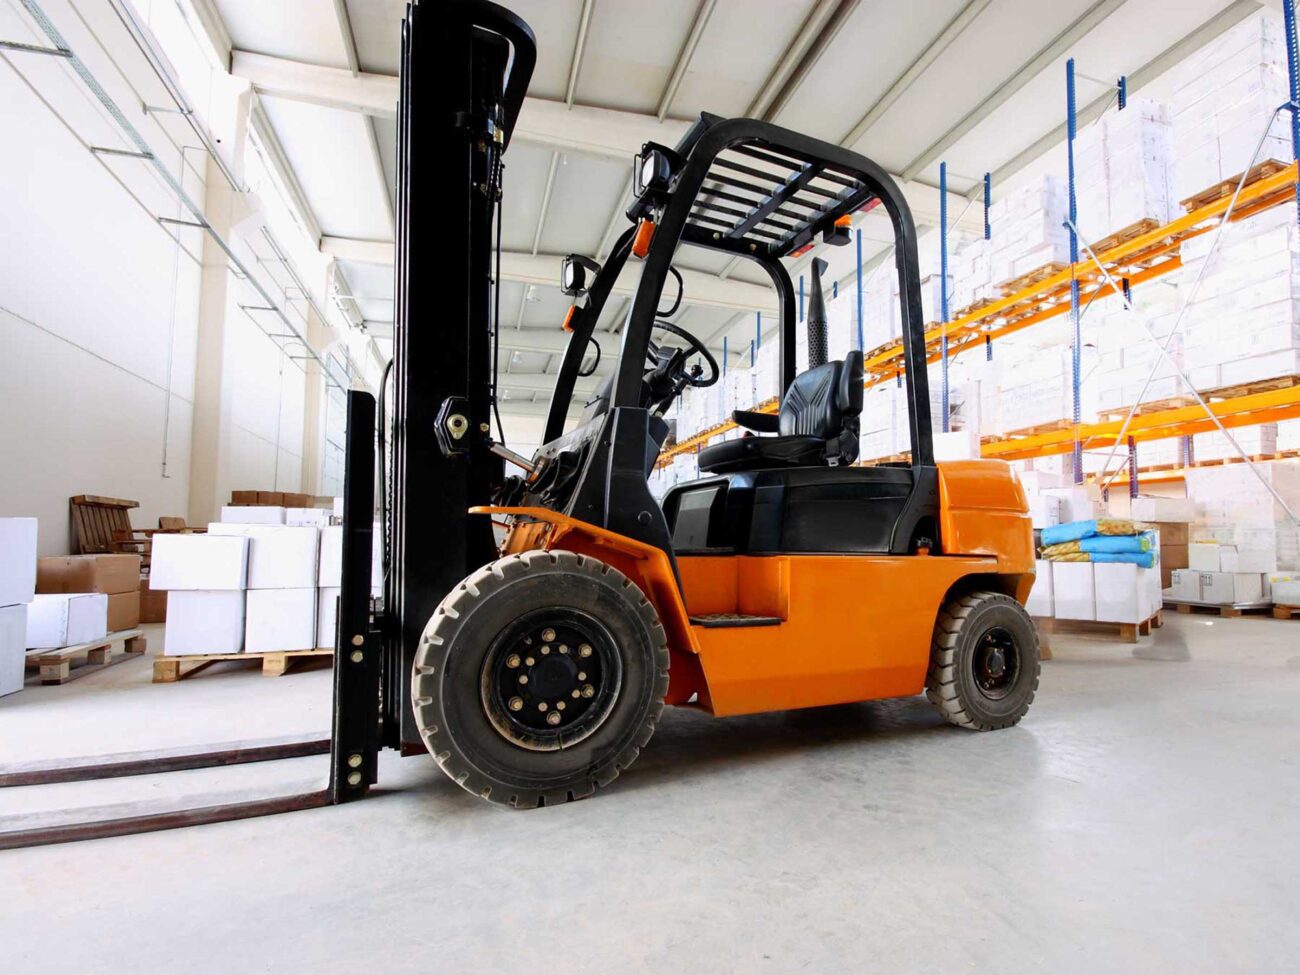 You might think that operating a forklift is just like driving a car. If you did think that, you would be wrong! Check out all the ways they are different!